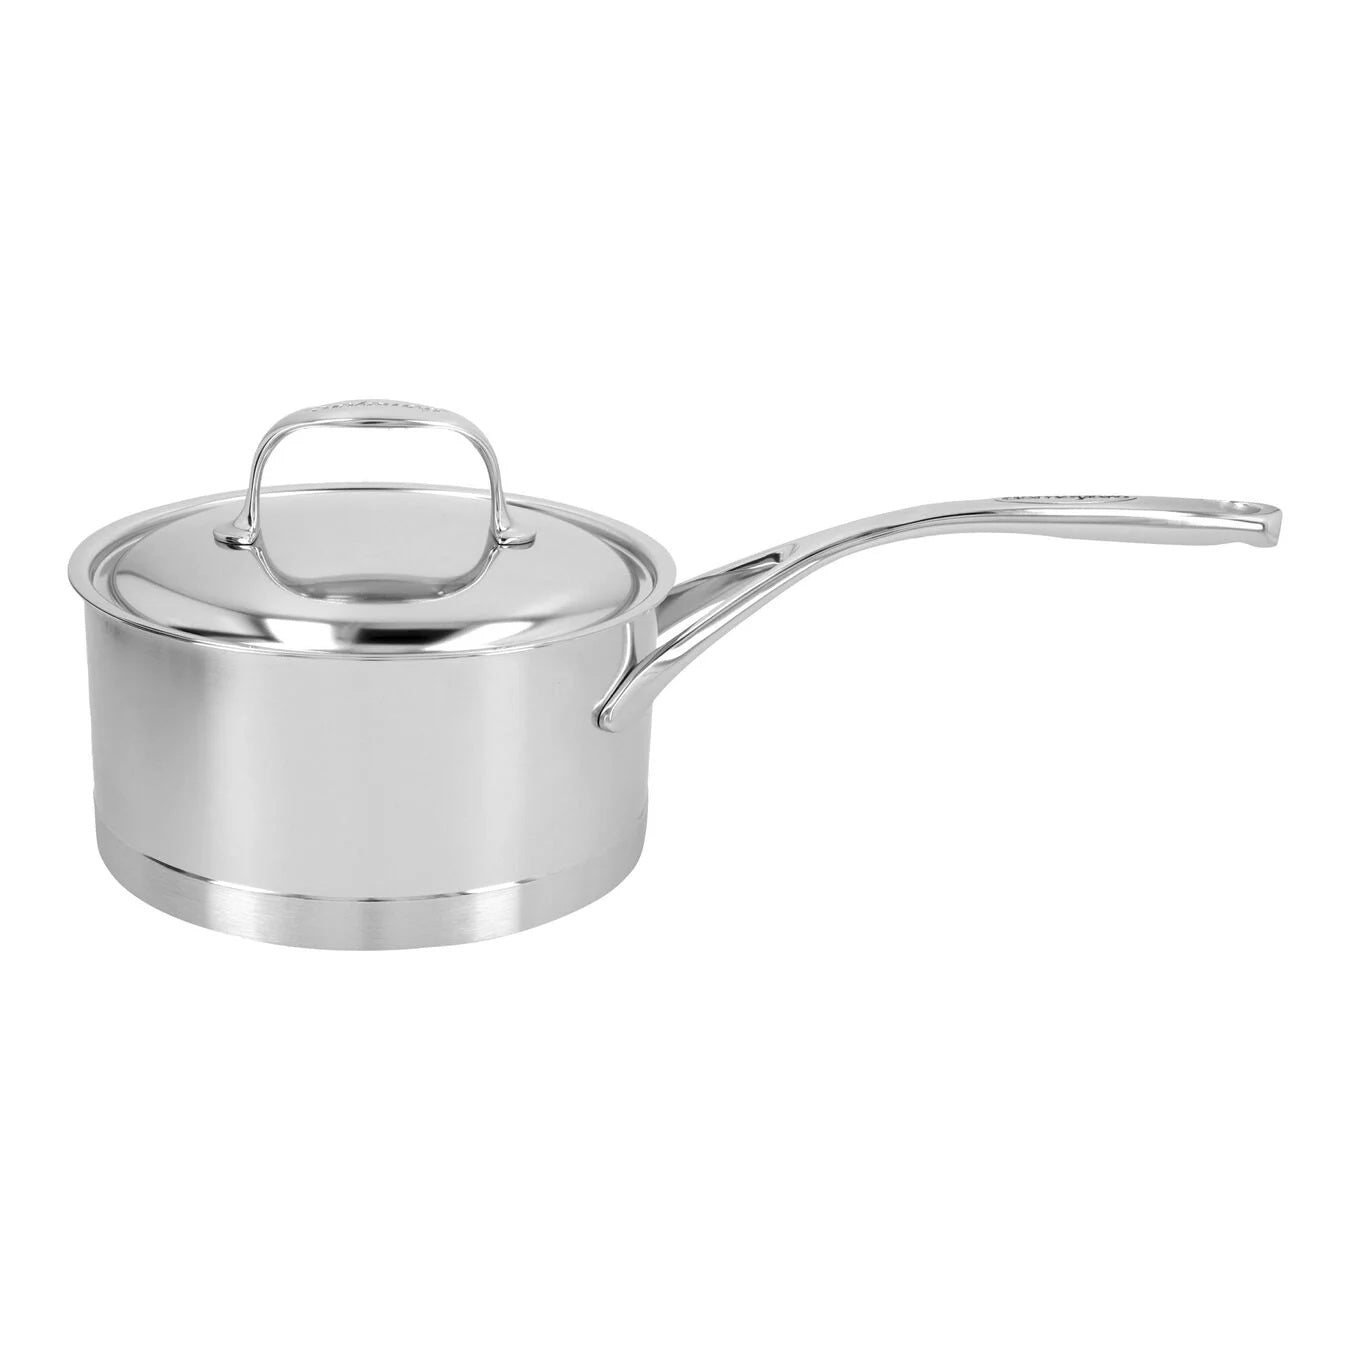 Demeyere Atlantis 7 Collection 2.2L 18/10 Stainless Steel Round Sauce Pan with Lid 2.2L